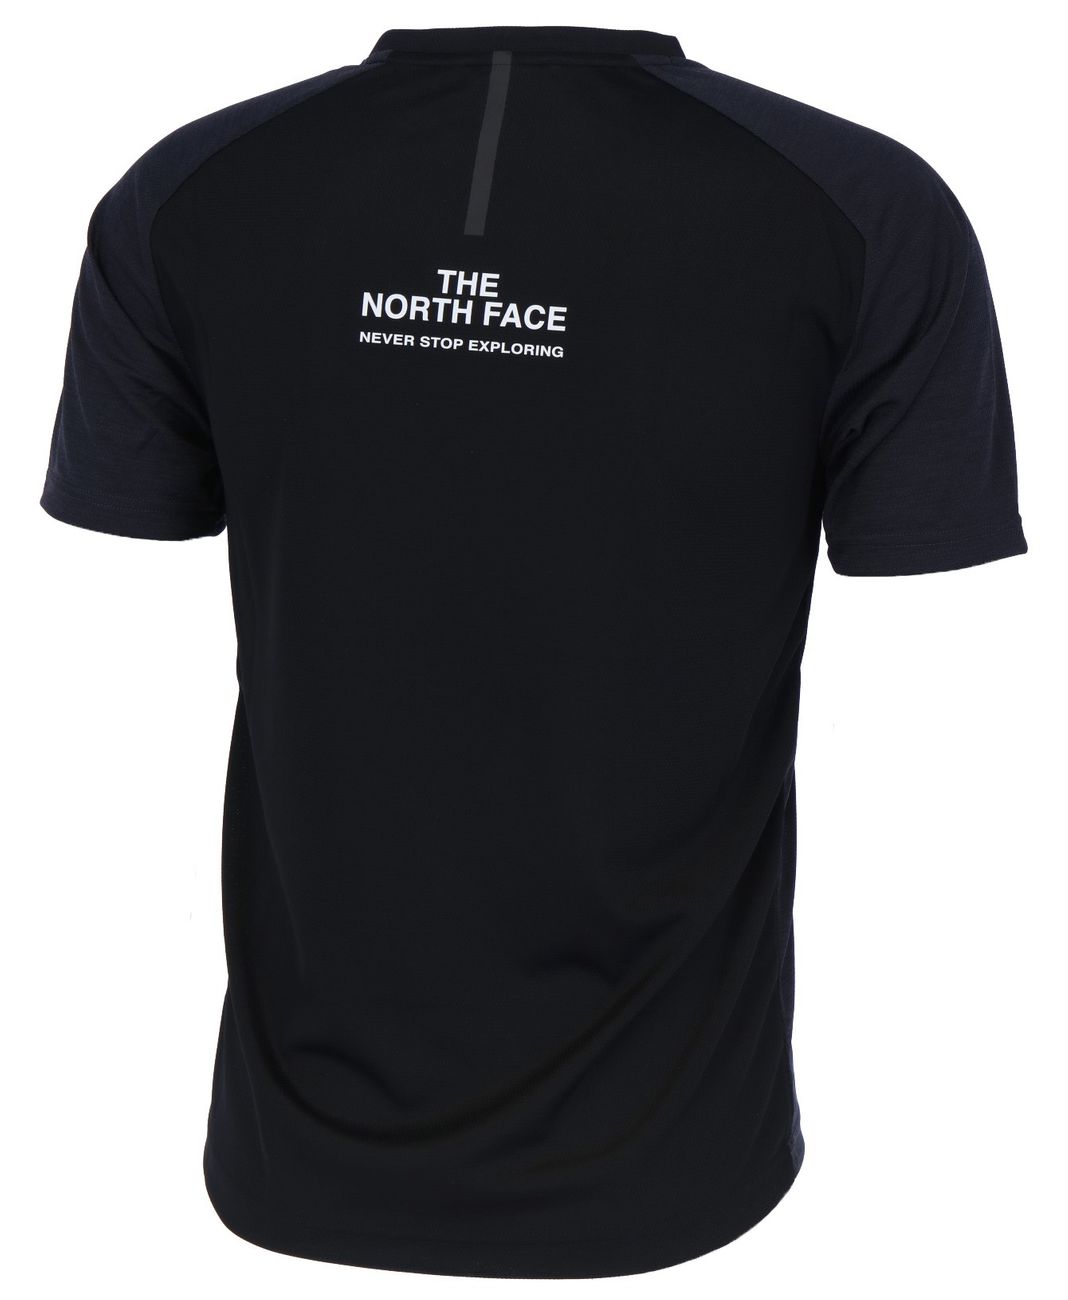 THE NORTH FACE M MOUNTAIN ATHLETICS TEE Herren T-Shirt - The North Face - SAGATOO - 193394988082